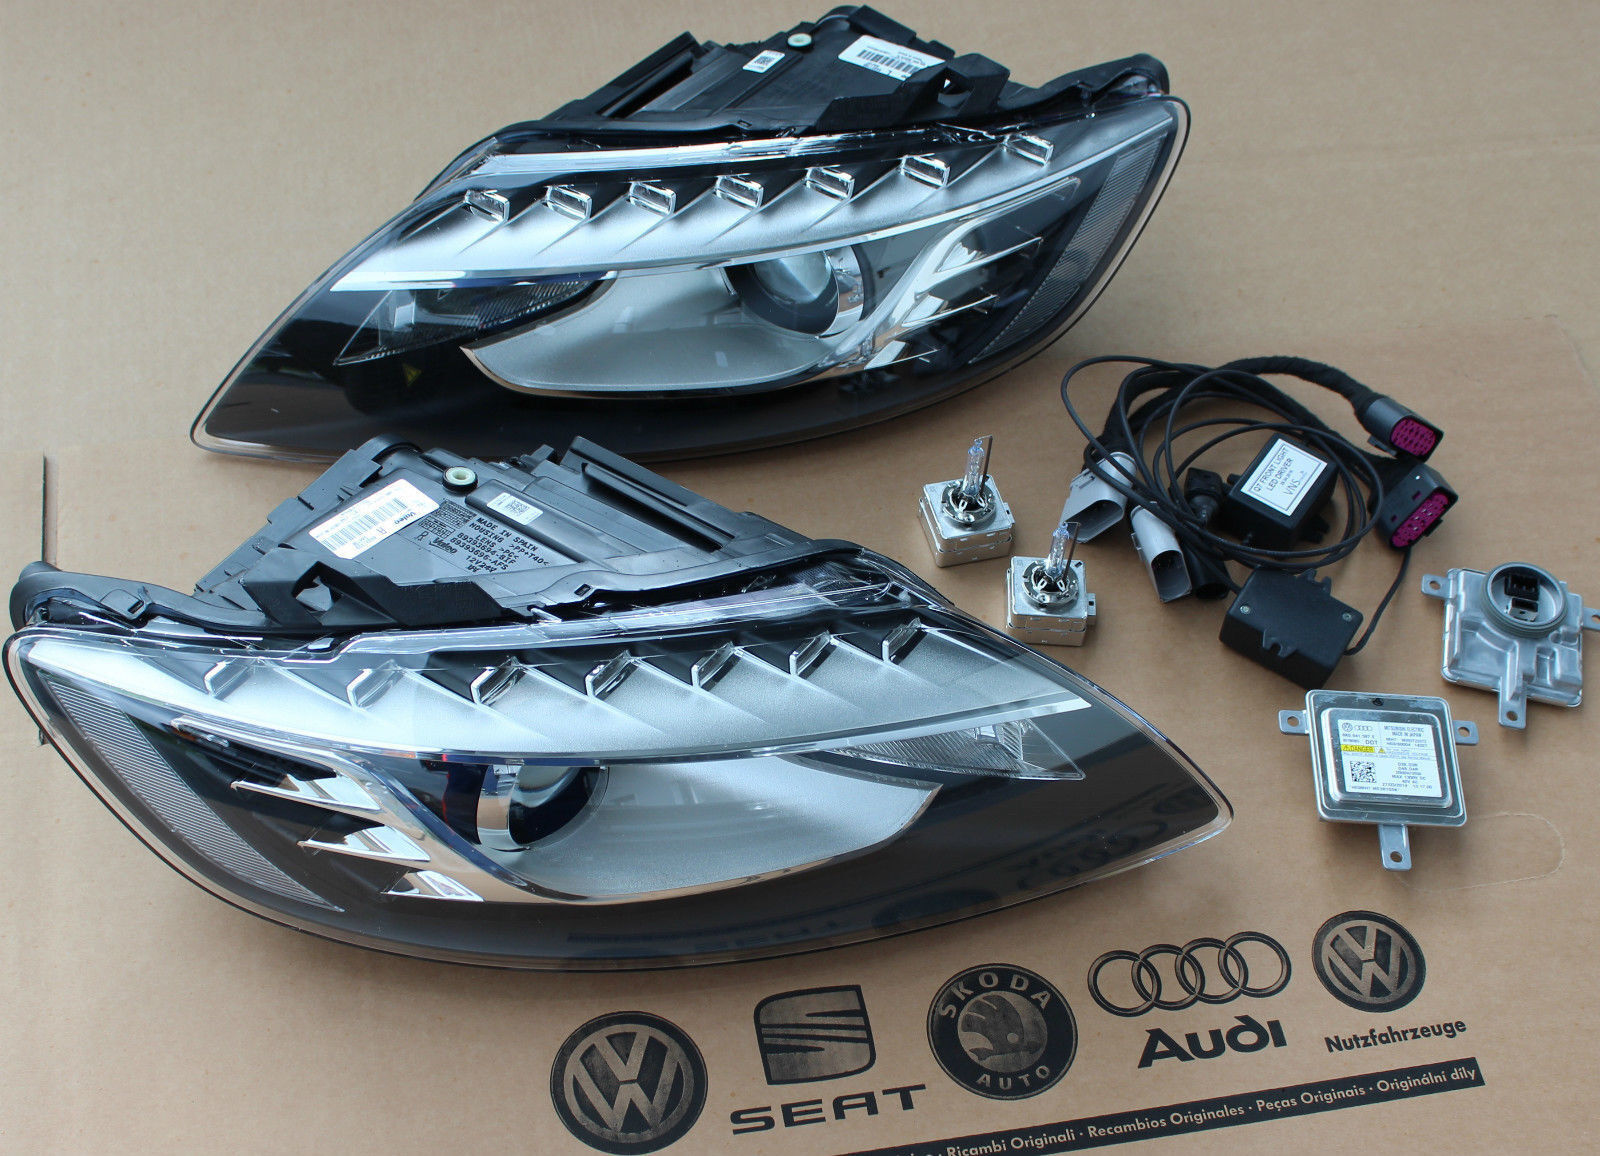 Audi Q7 Facelift Xenon Headlights complete with Adapter Plug & Play LED Bixenon